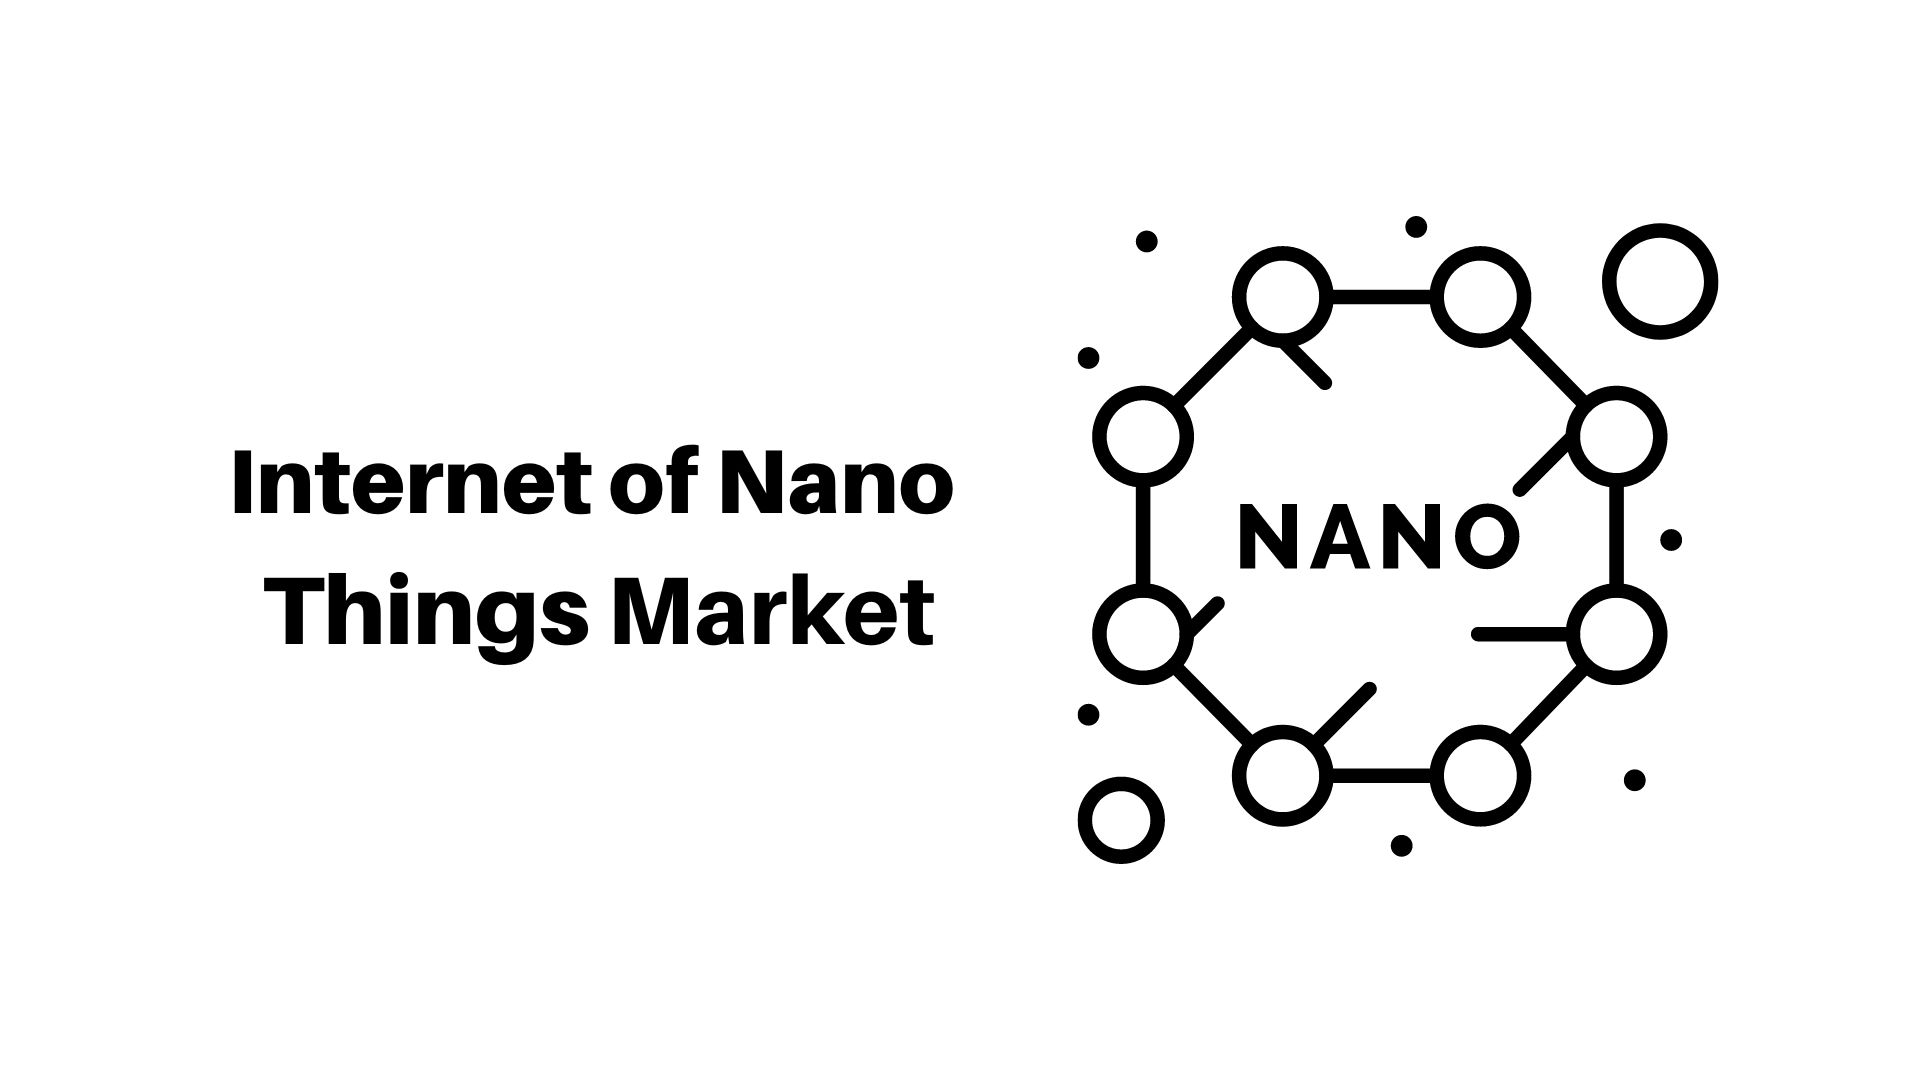 Internet of Nano Things Market is Estimated to Showcase Significant Growth of USD 123.5 Bn in 2032 With a CAGR 22.38%